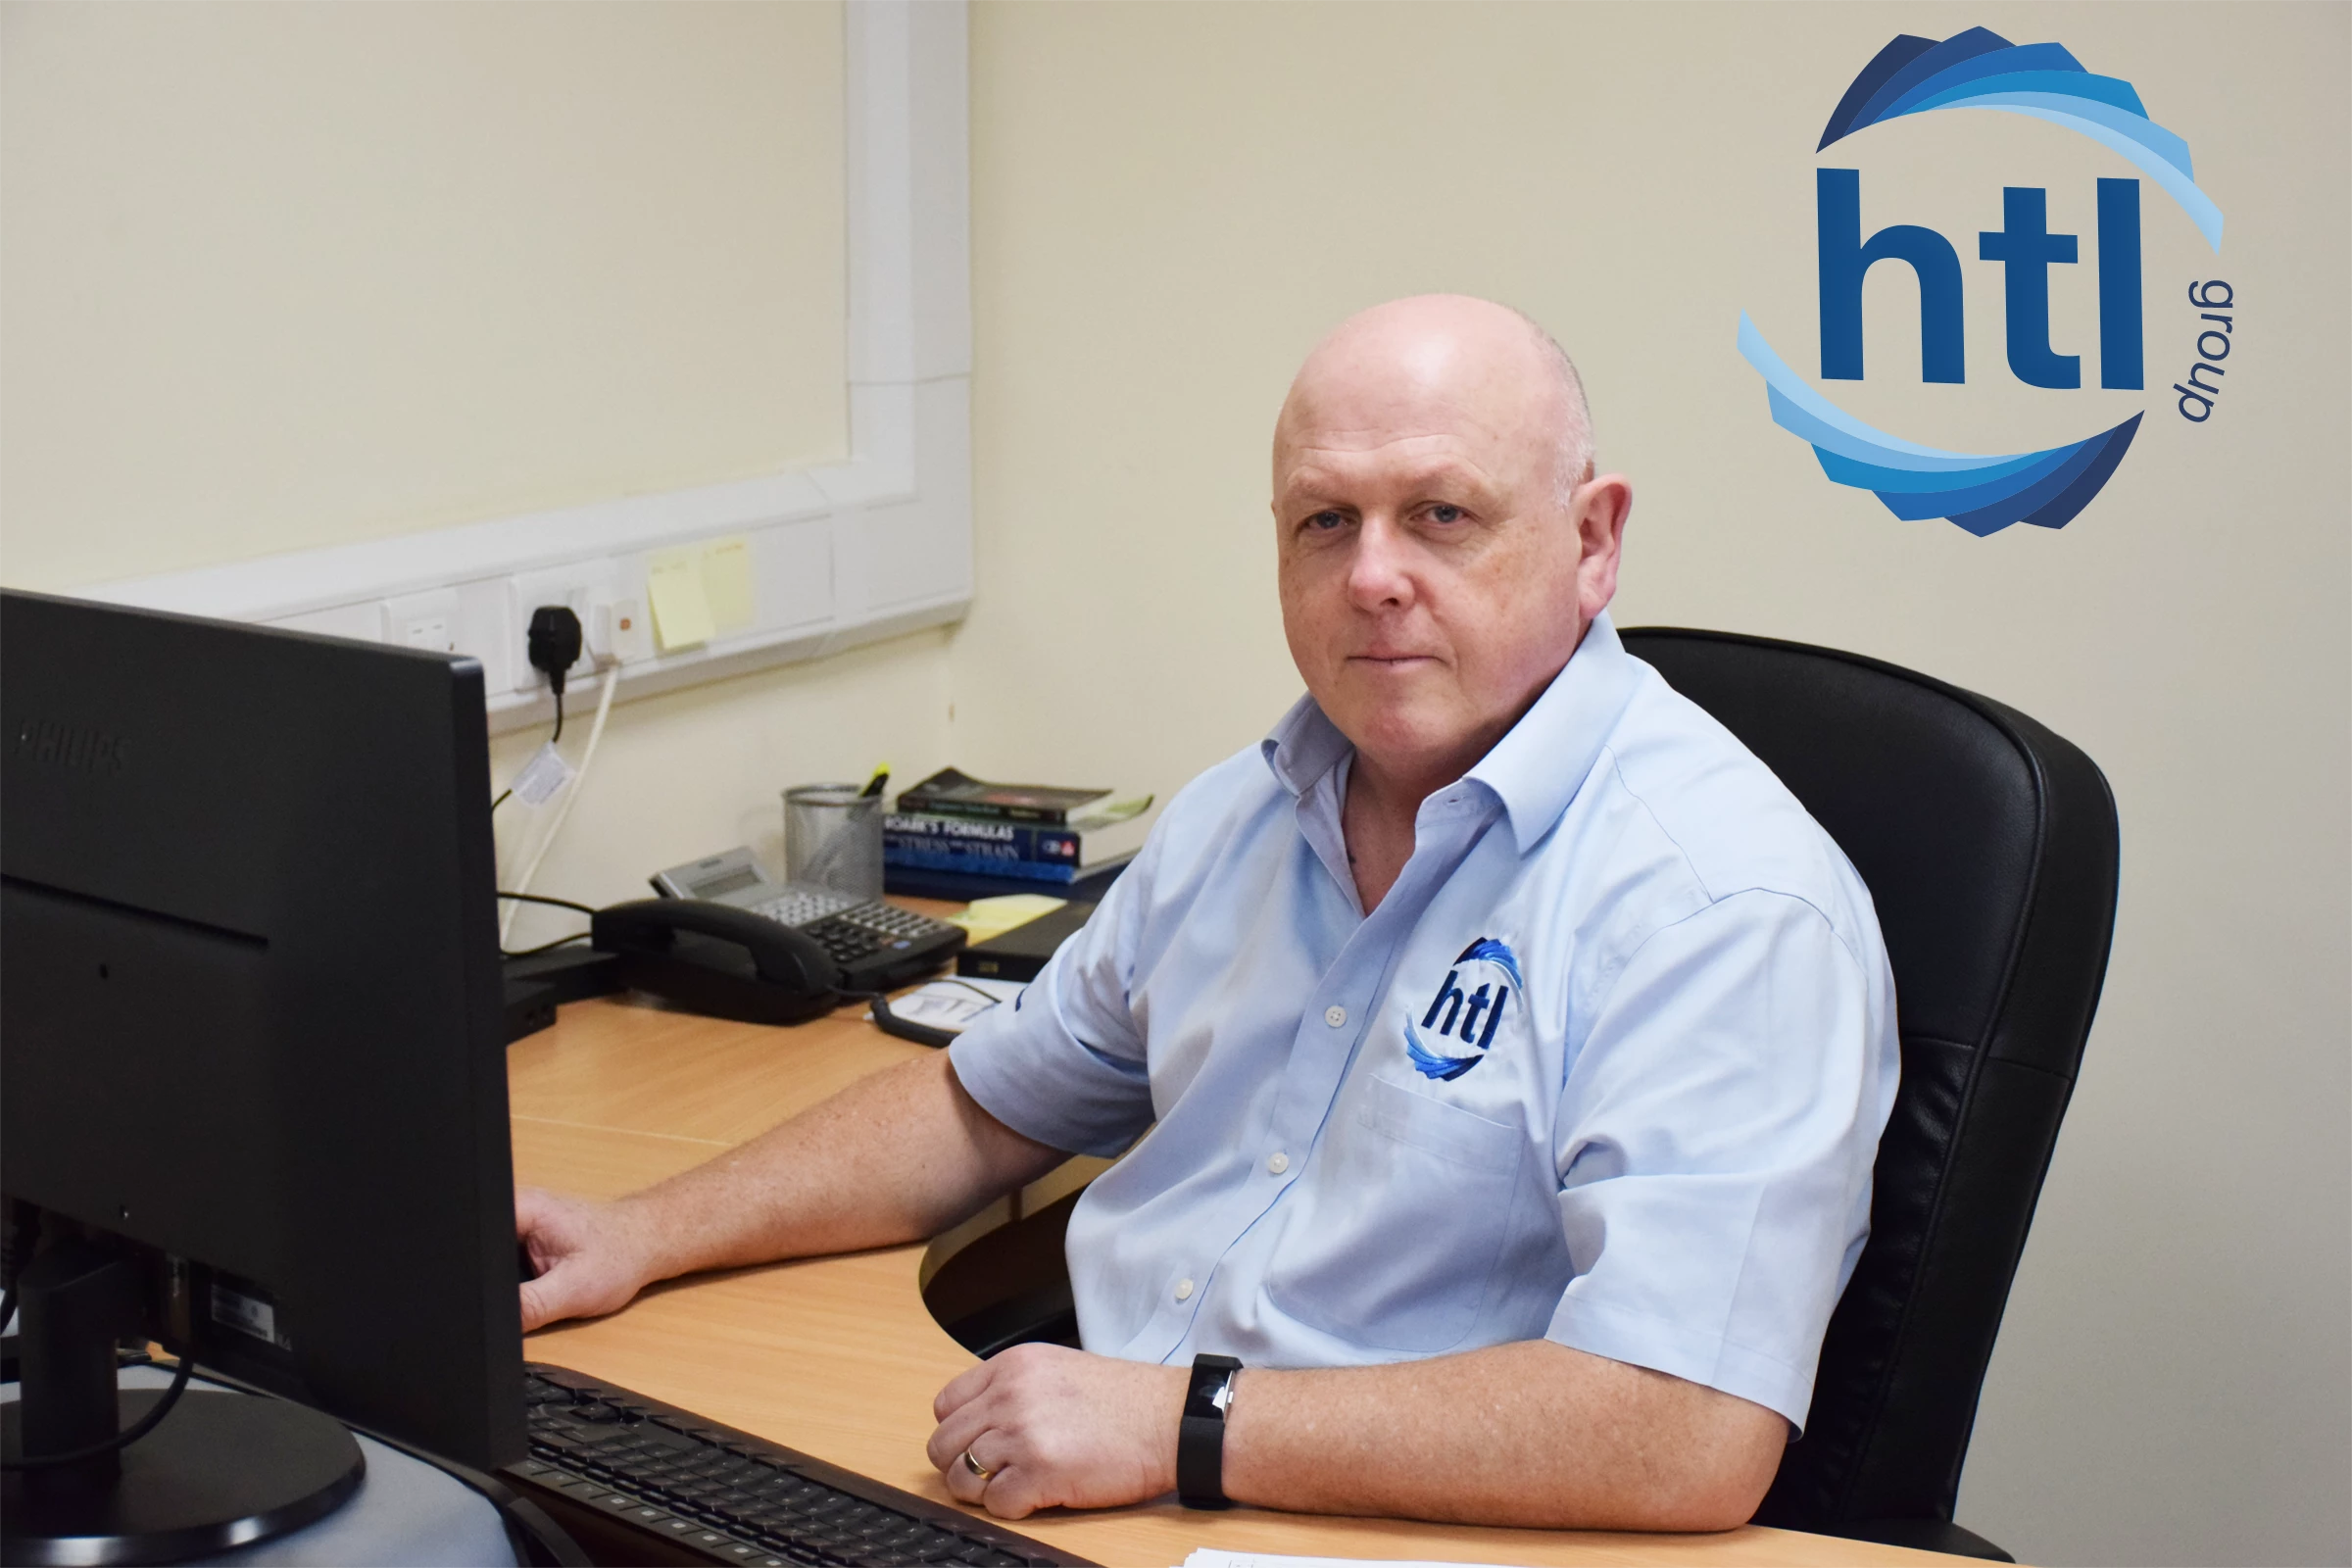 Bob Fogerty, Group Technical Director, HTL Group